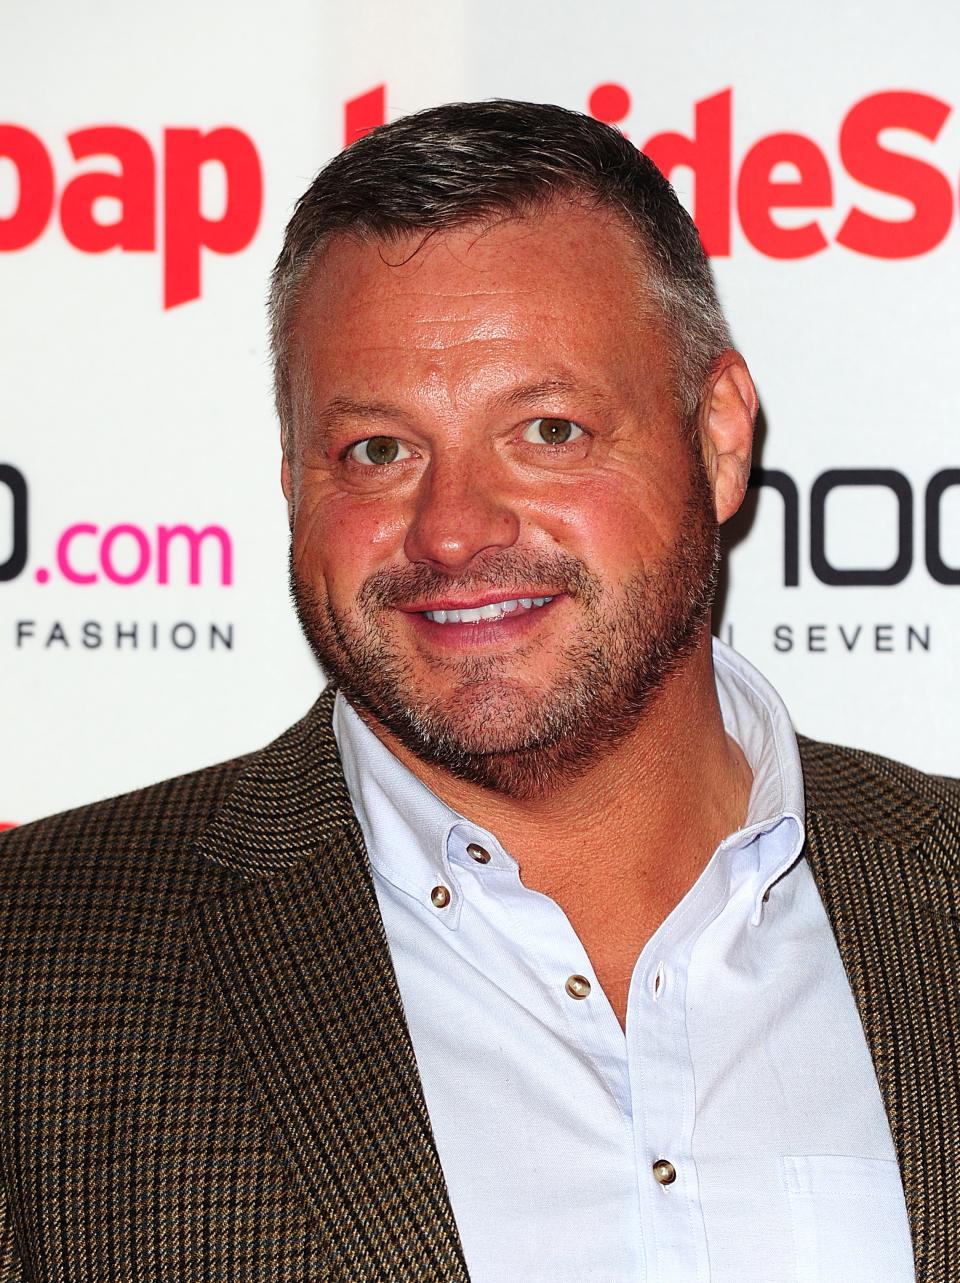 Mick Norcross at the 2012 Inside Soap Awards at One Marylebone, London.   (Photo by Ian West/PA Images via Getty Images)